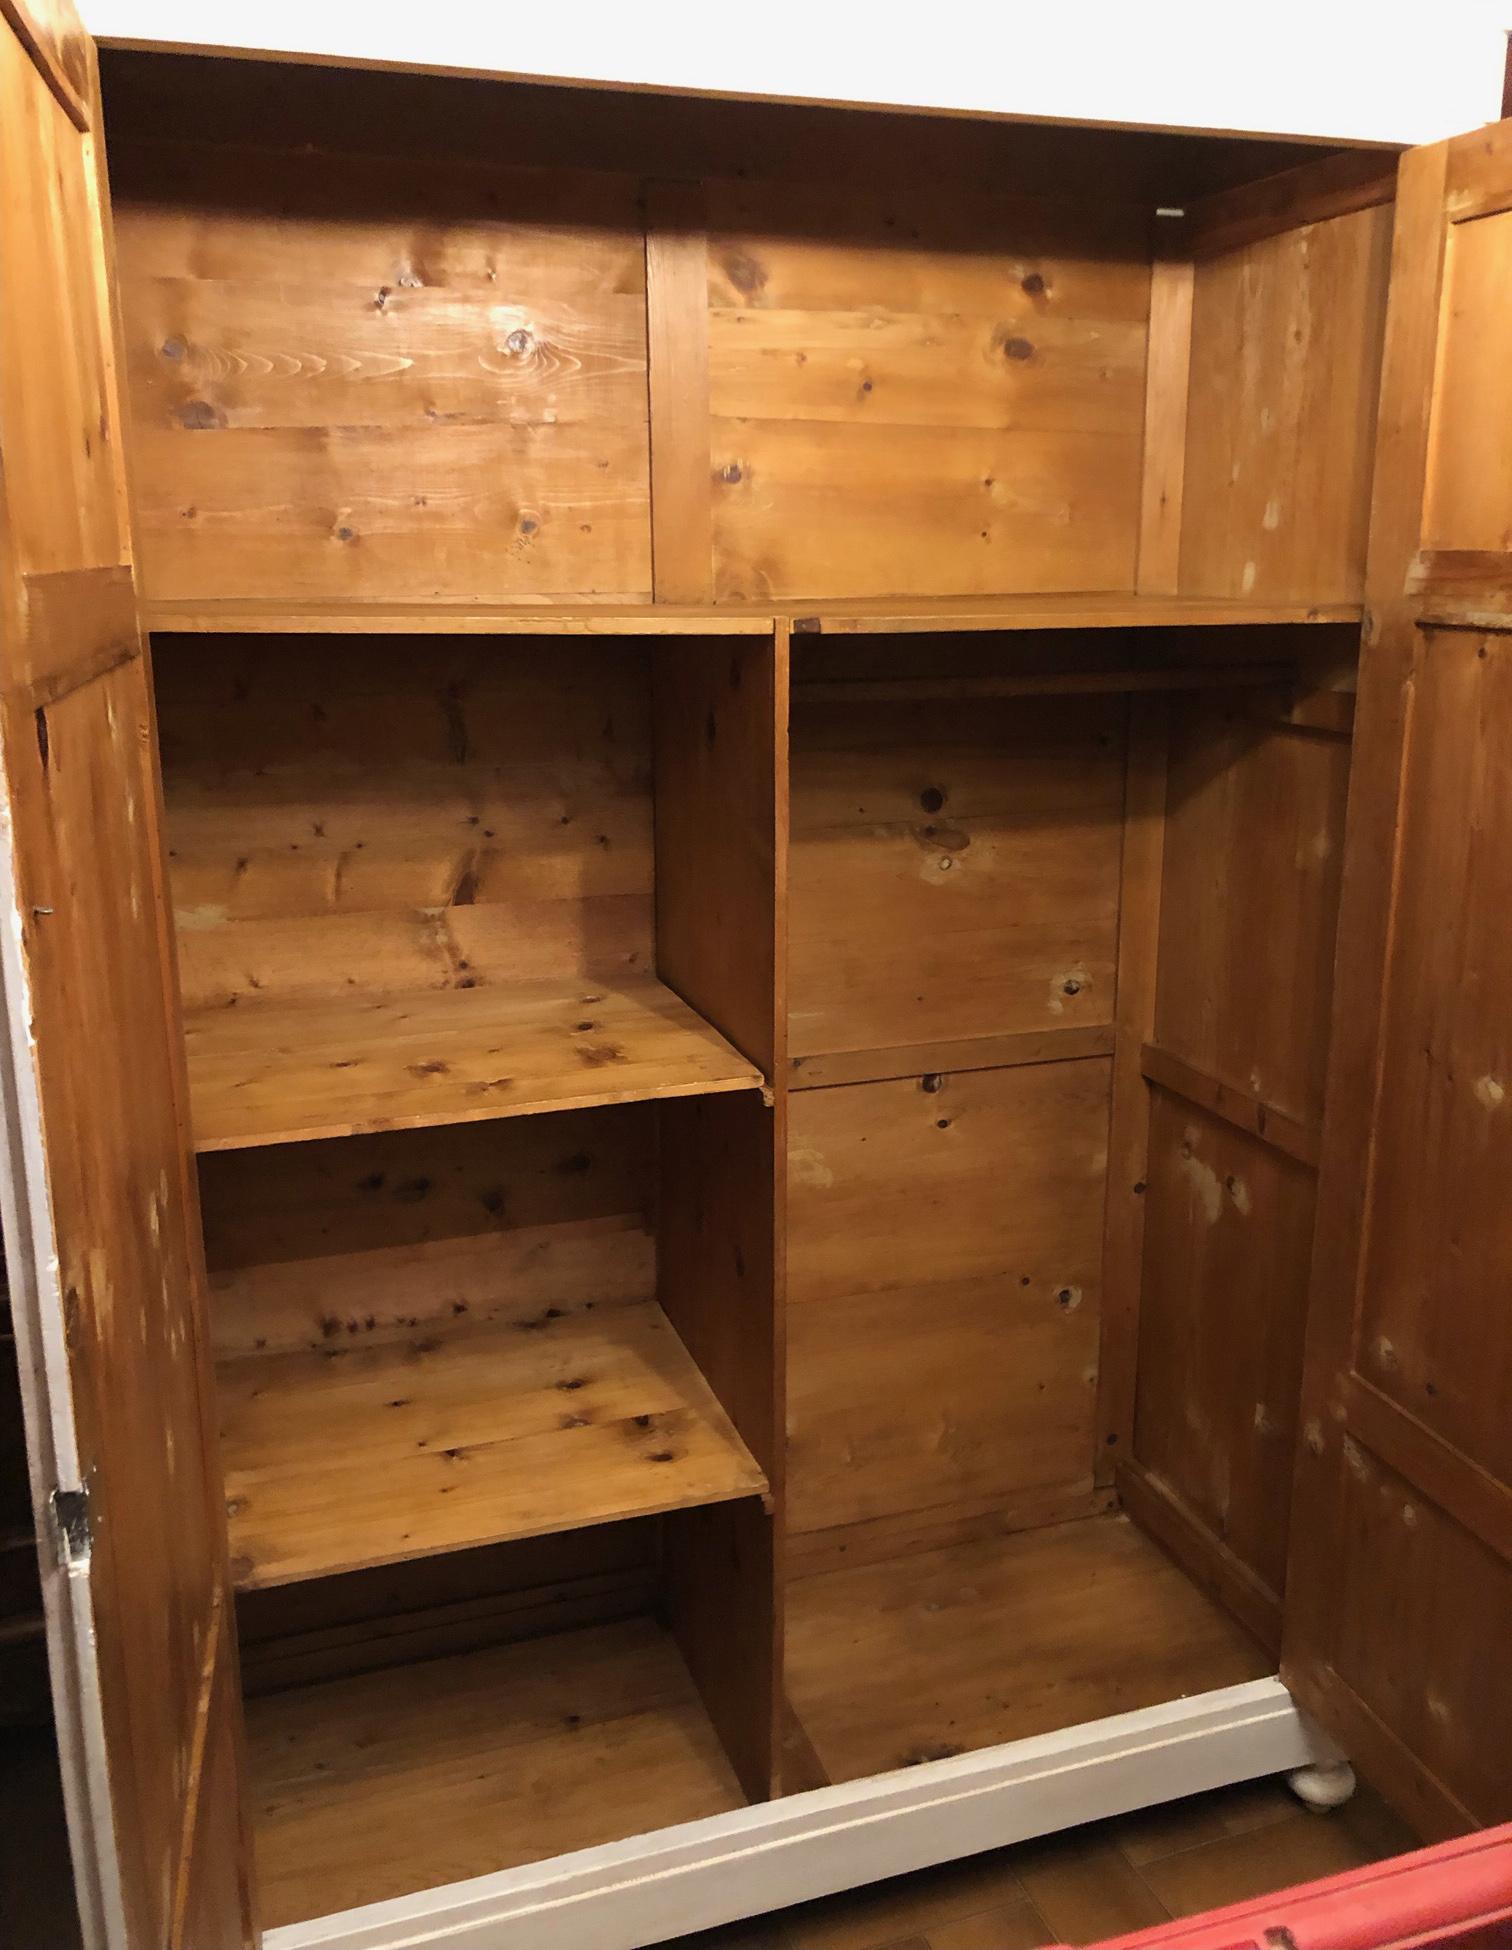 20th century Italian wardrobe with two doors, original walnut color inside and patinated white outside.
The wardrobe is made up of ten pieces that are easily reassembled in 10 minutes.
It has a shelf and internal clothes rail.
It is very elegant